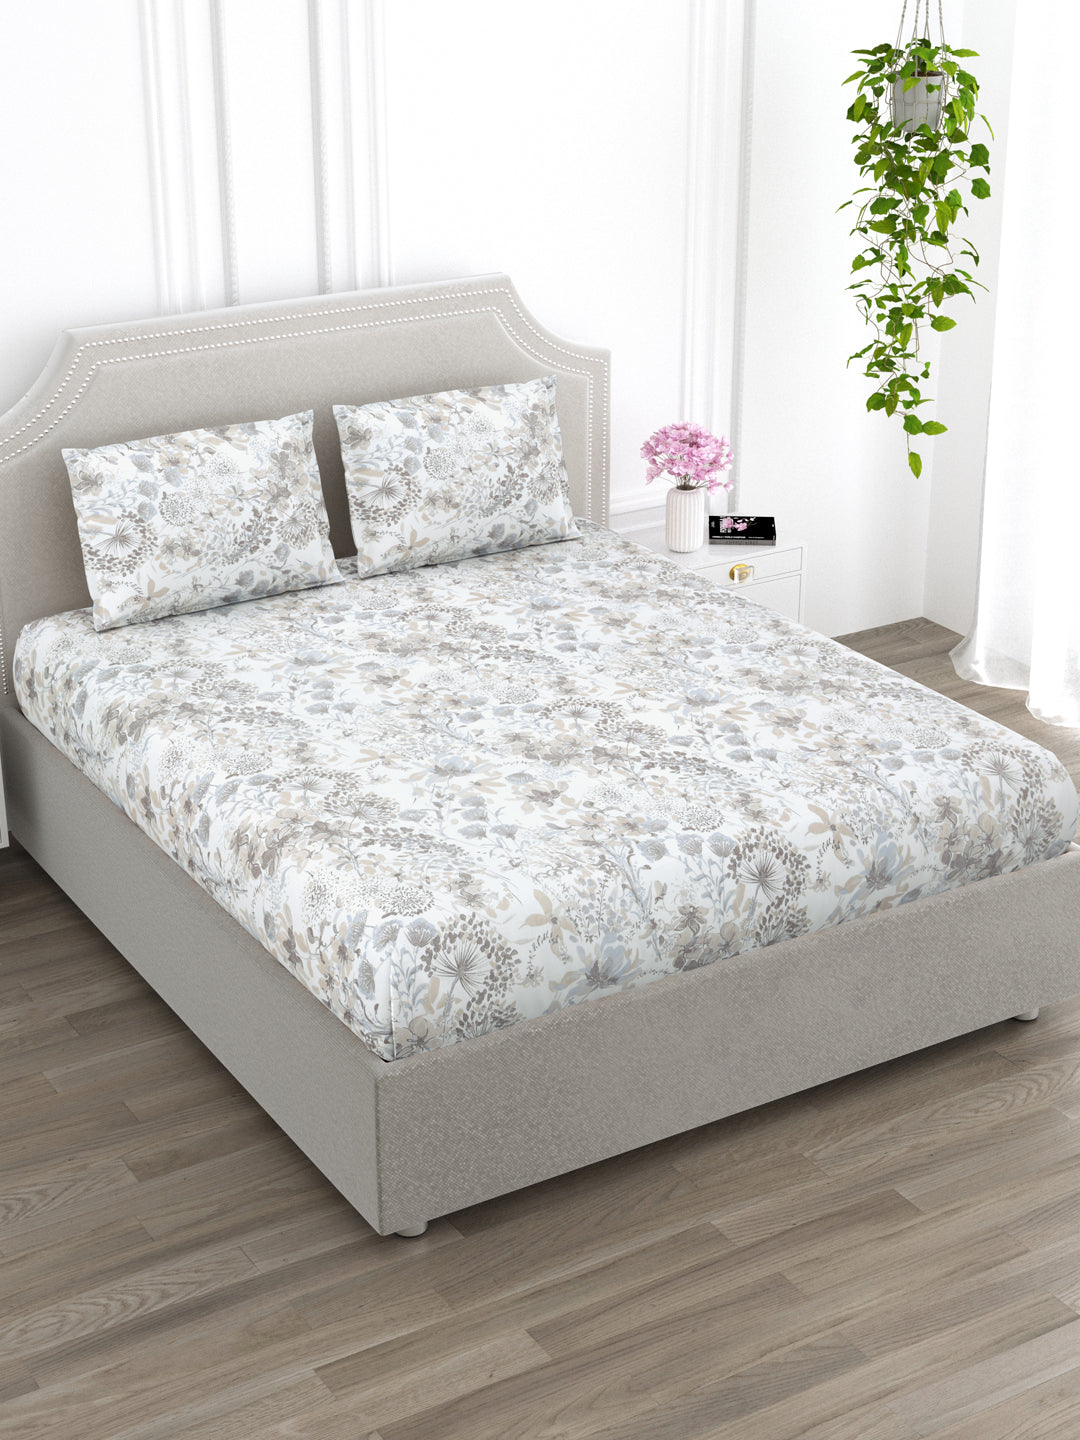 White Base Brown Floral King Size Bed Cotton Linen